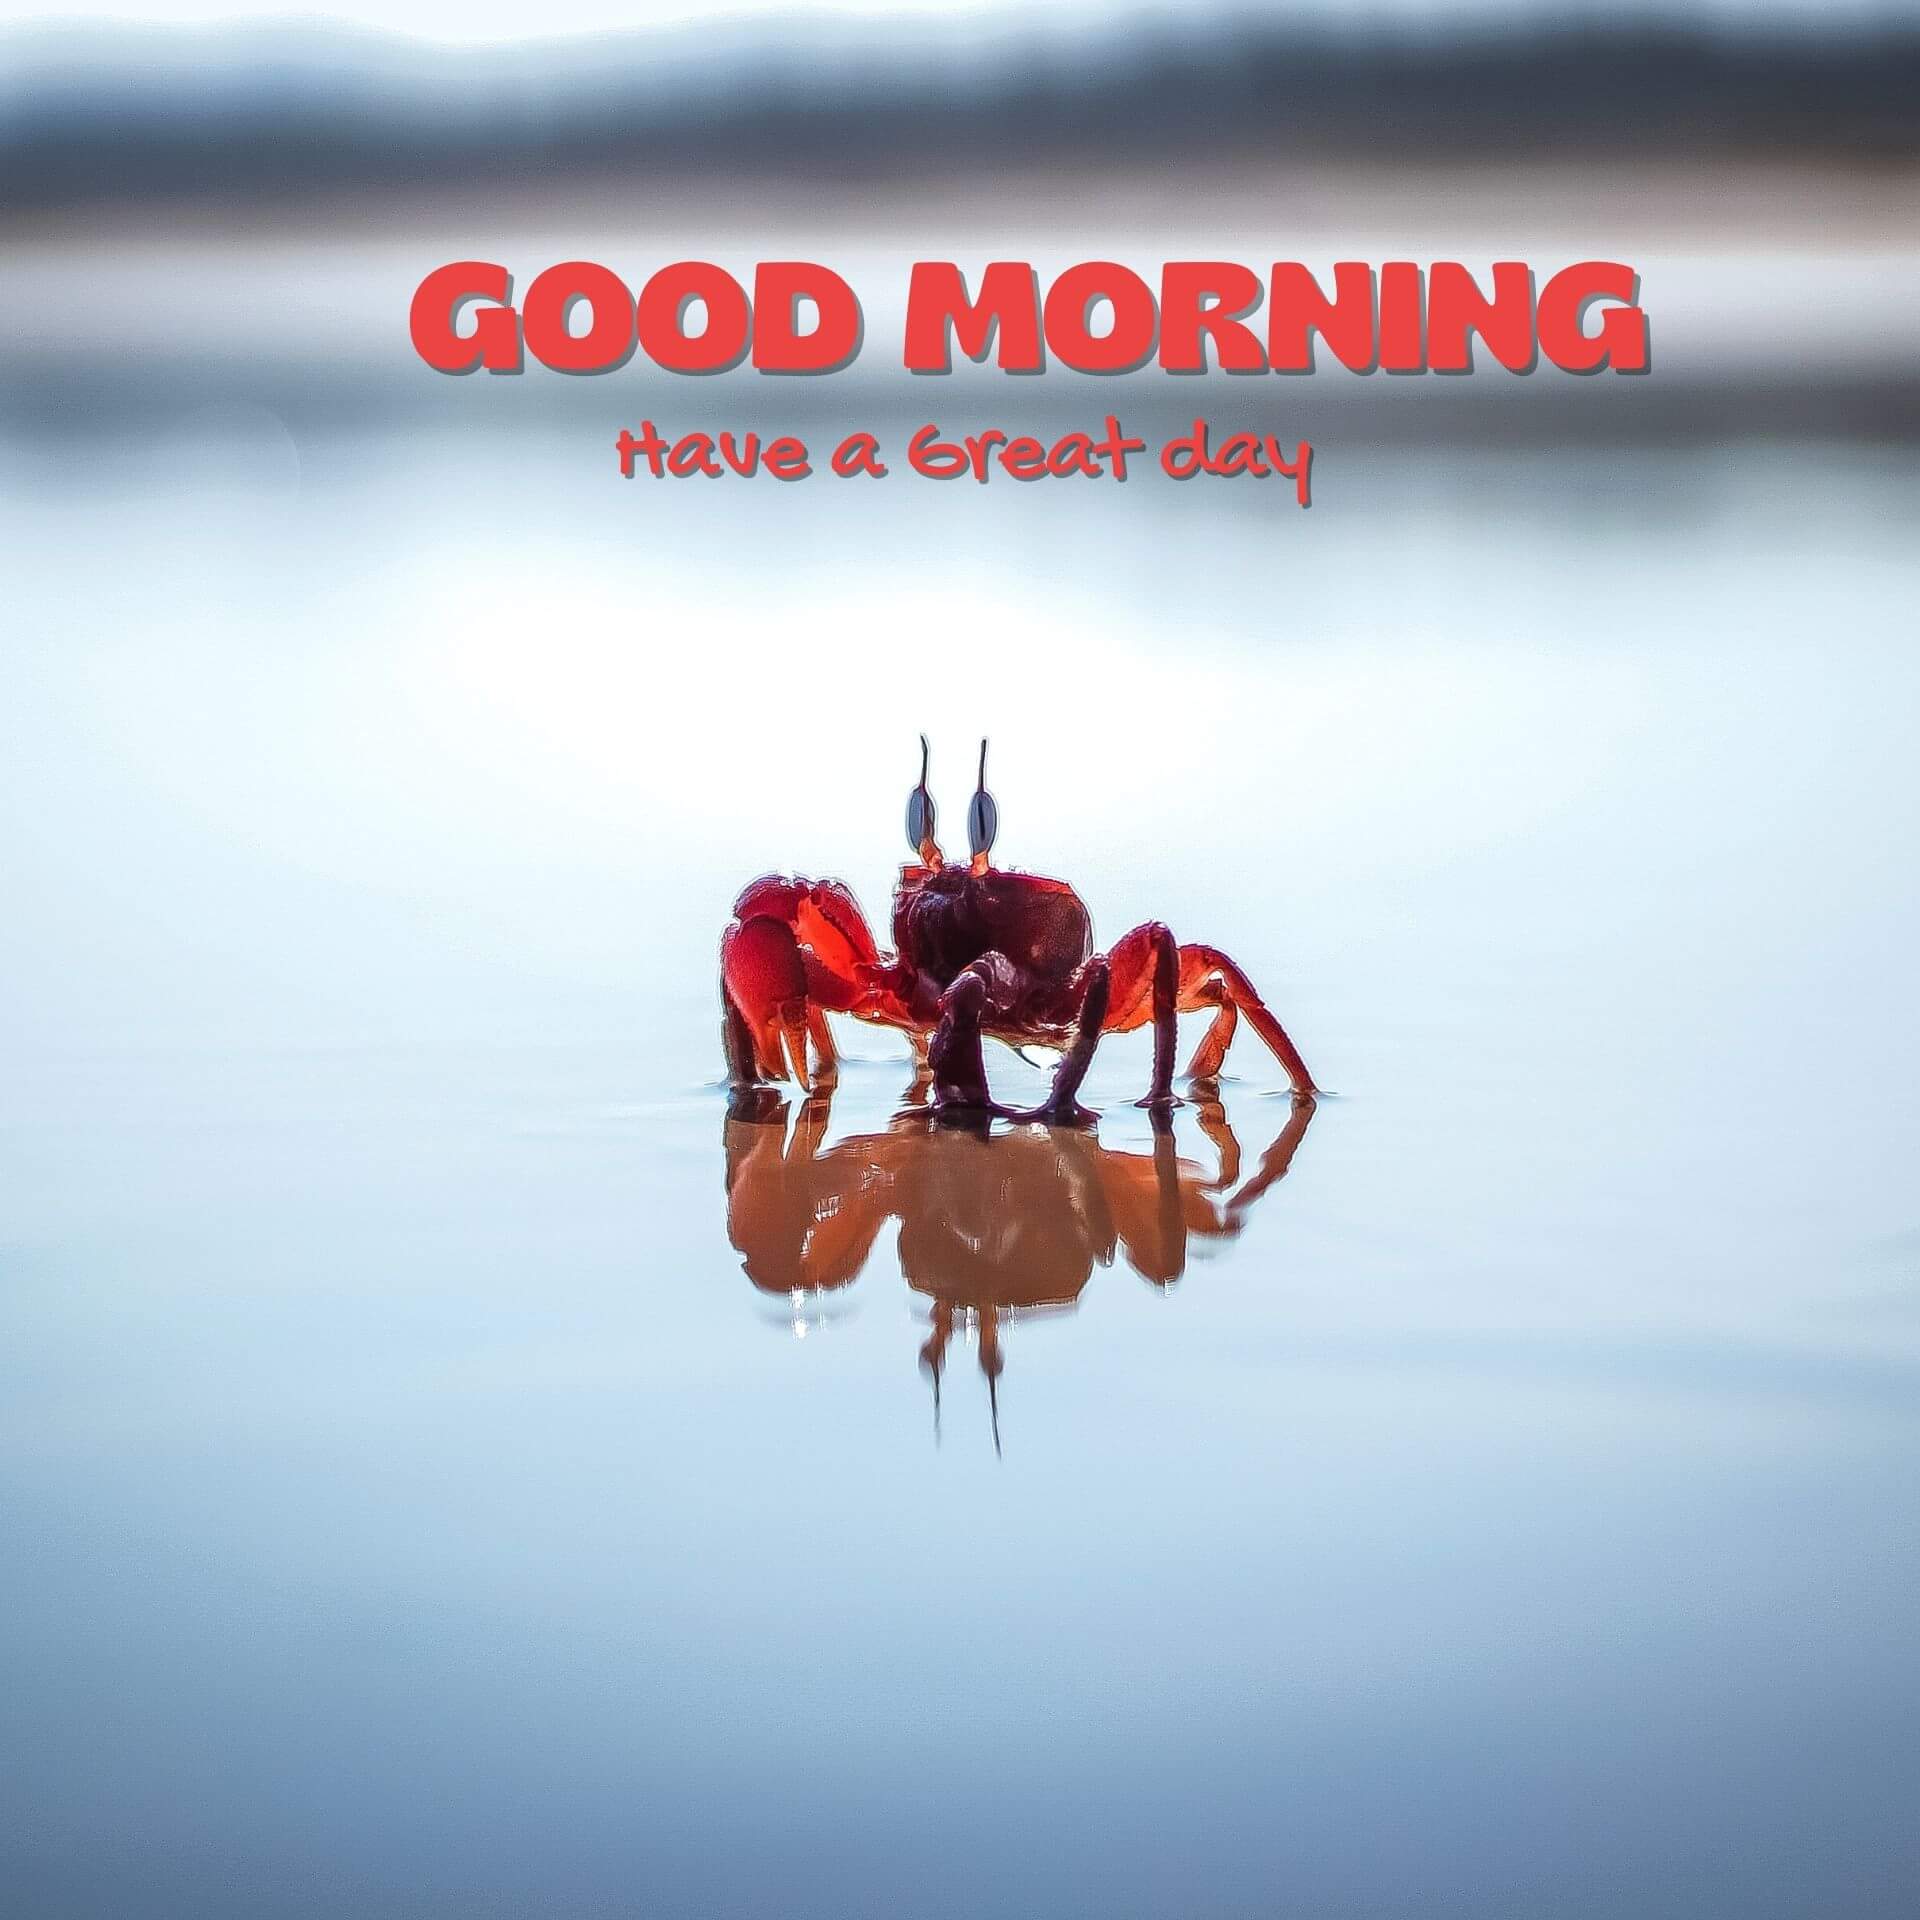 Good morning have a nice day Wallpaper Free Download 2023 3